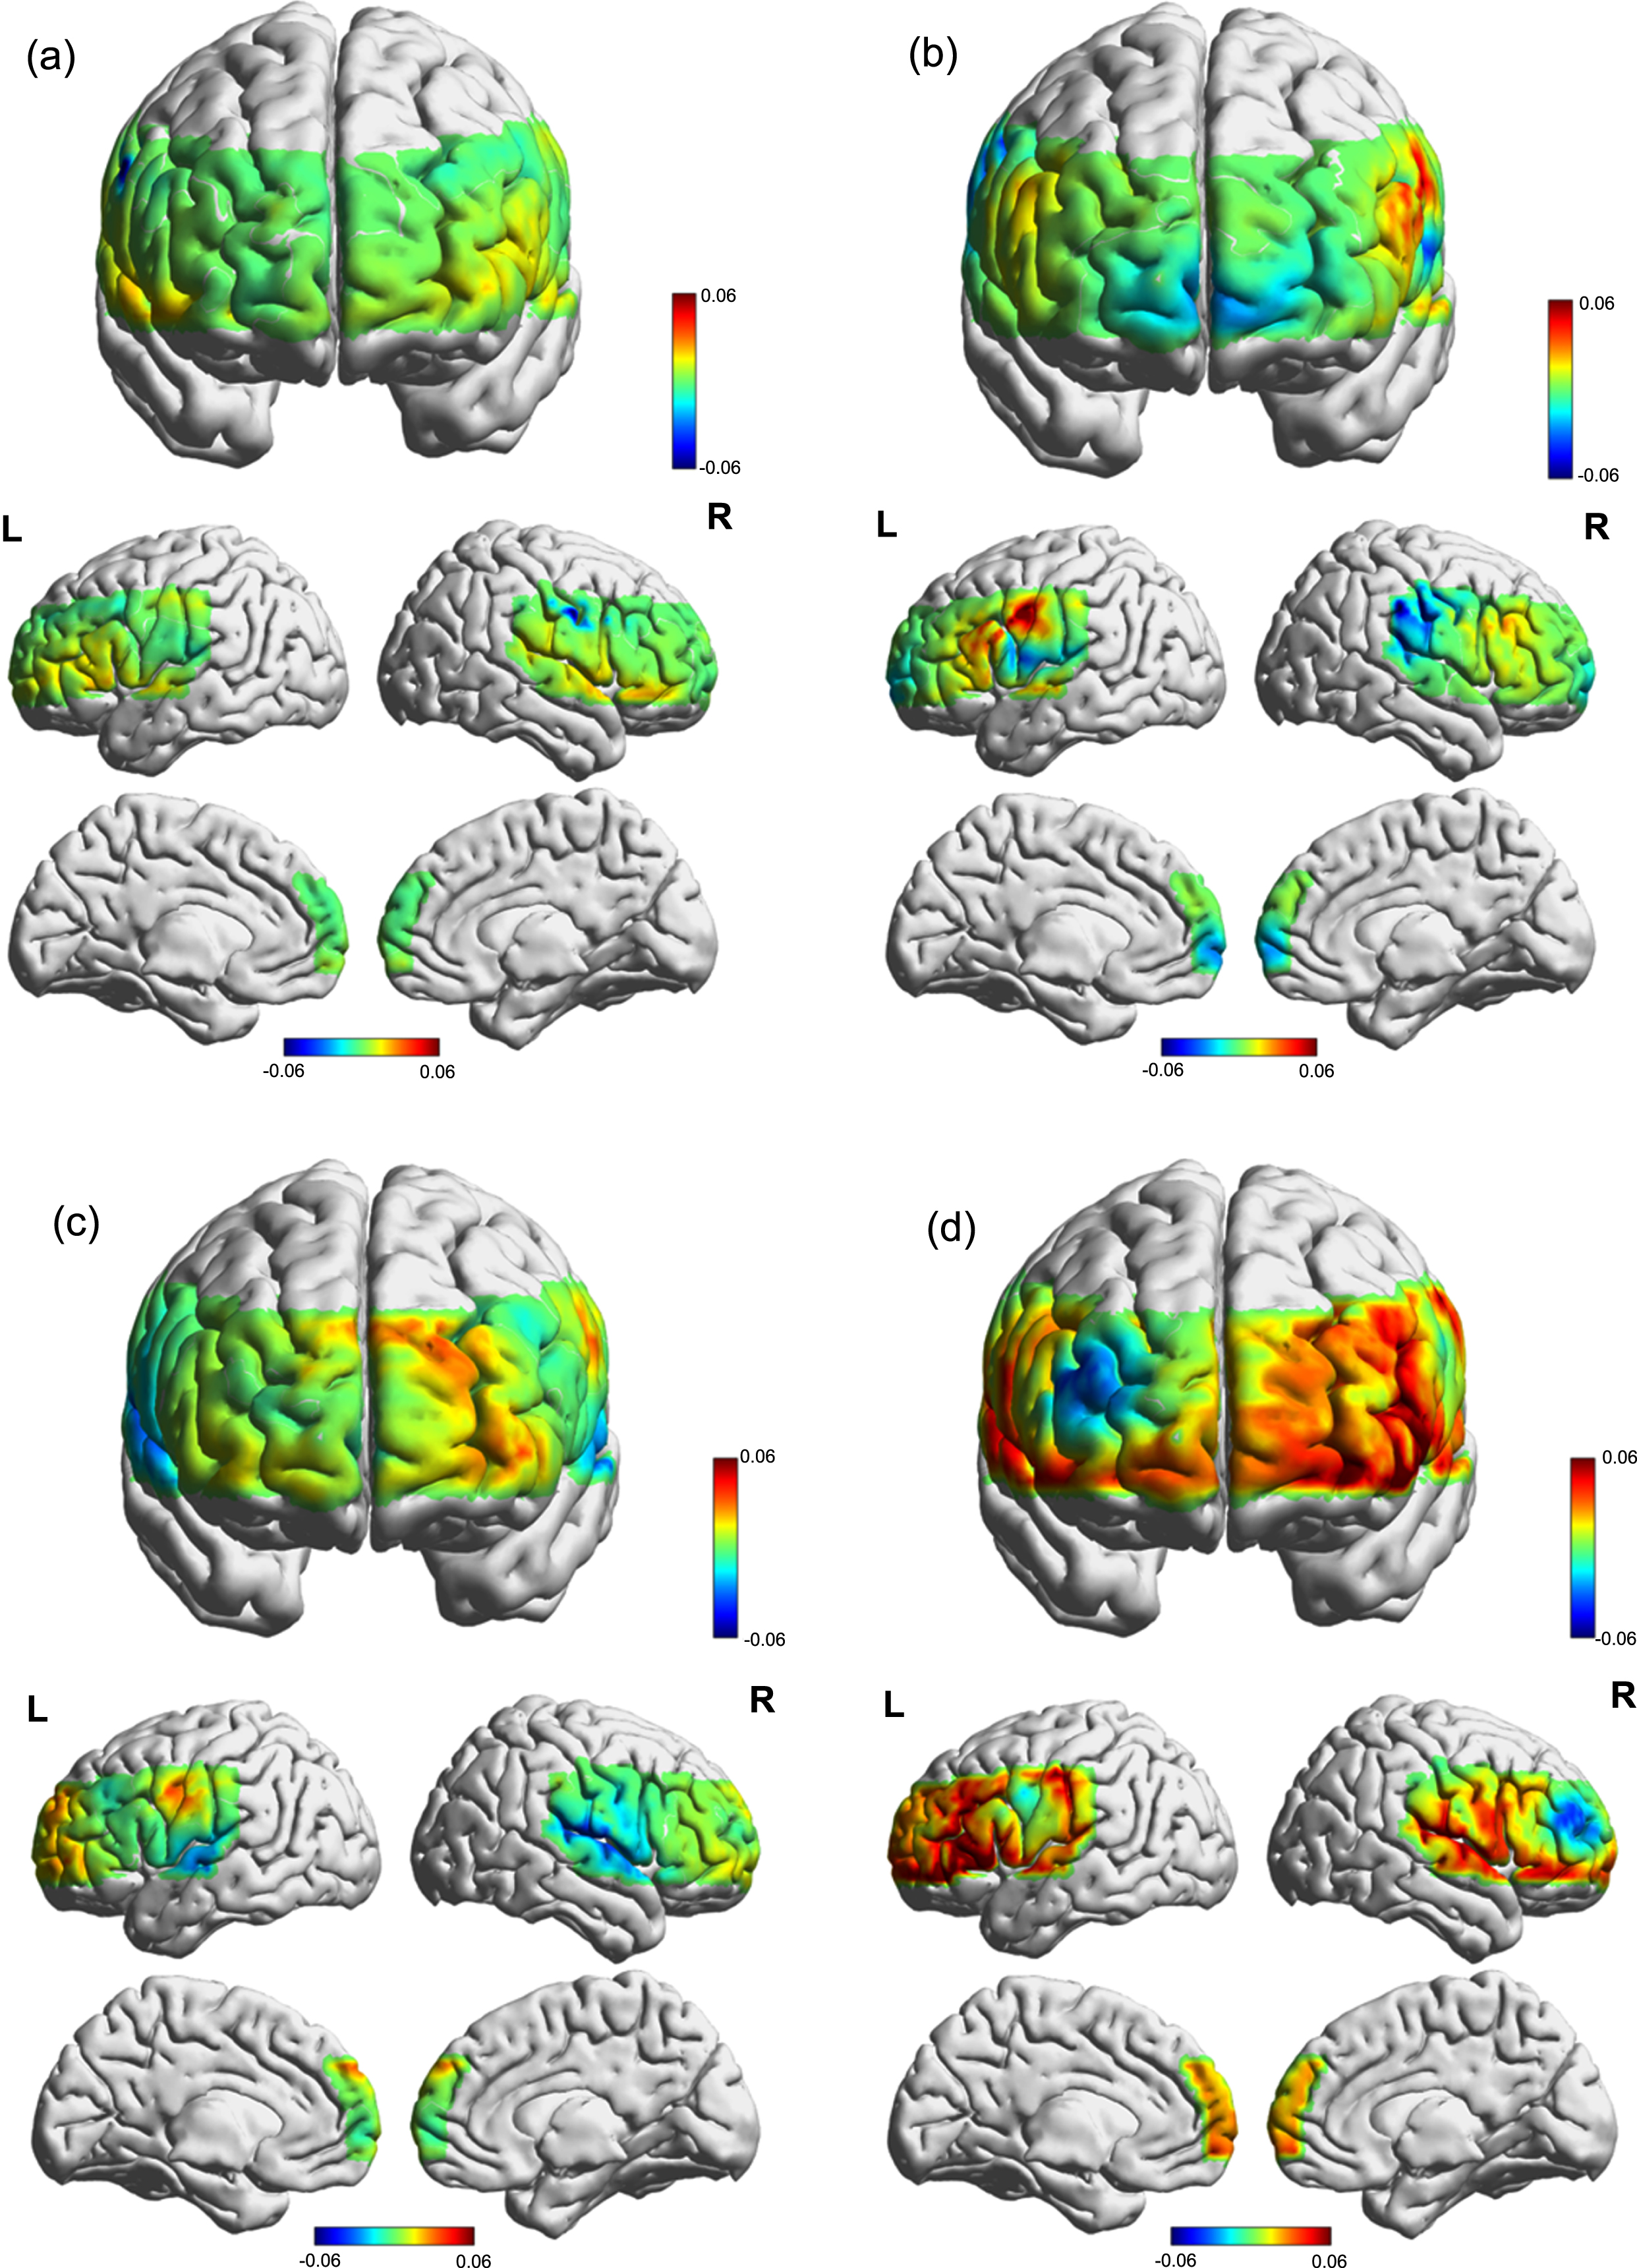 Cortical activation map based on beta values during VFT in different groups. (a) T0 of the control group. (b) T1 of the control group. (c) T0 of the iTBS group. (d) T1 of the iTBS group.